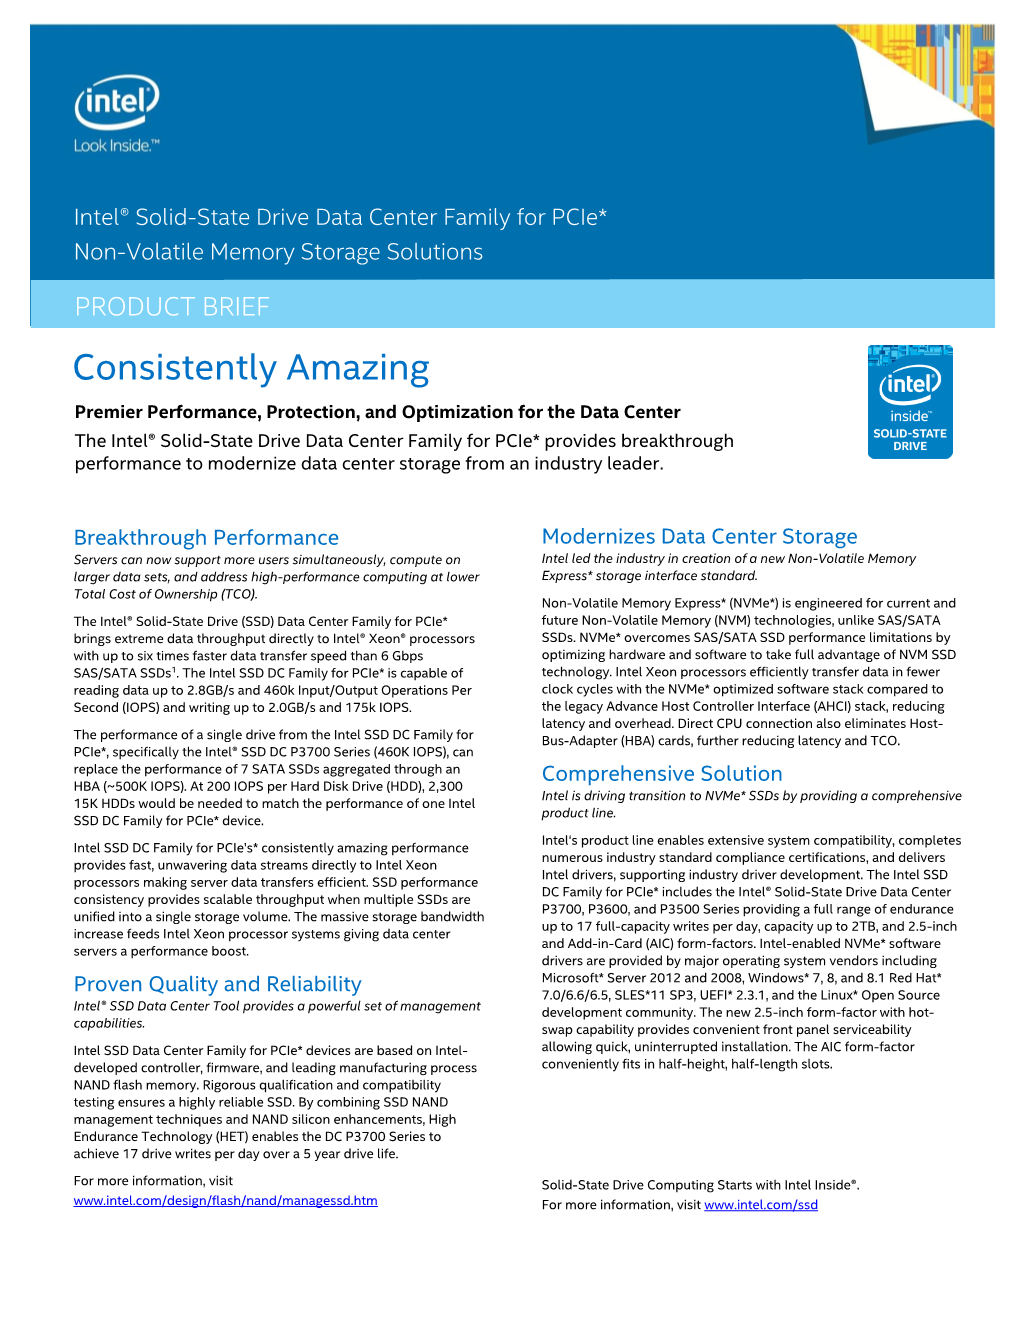 Intel® Solid-State Drive Data Center Family for Pcie Product Brief